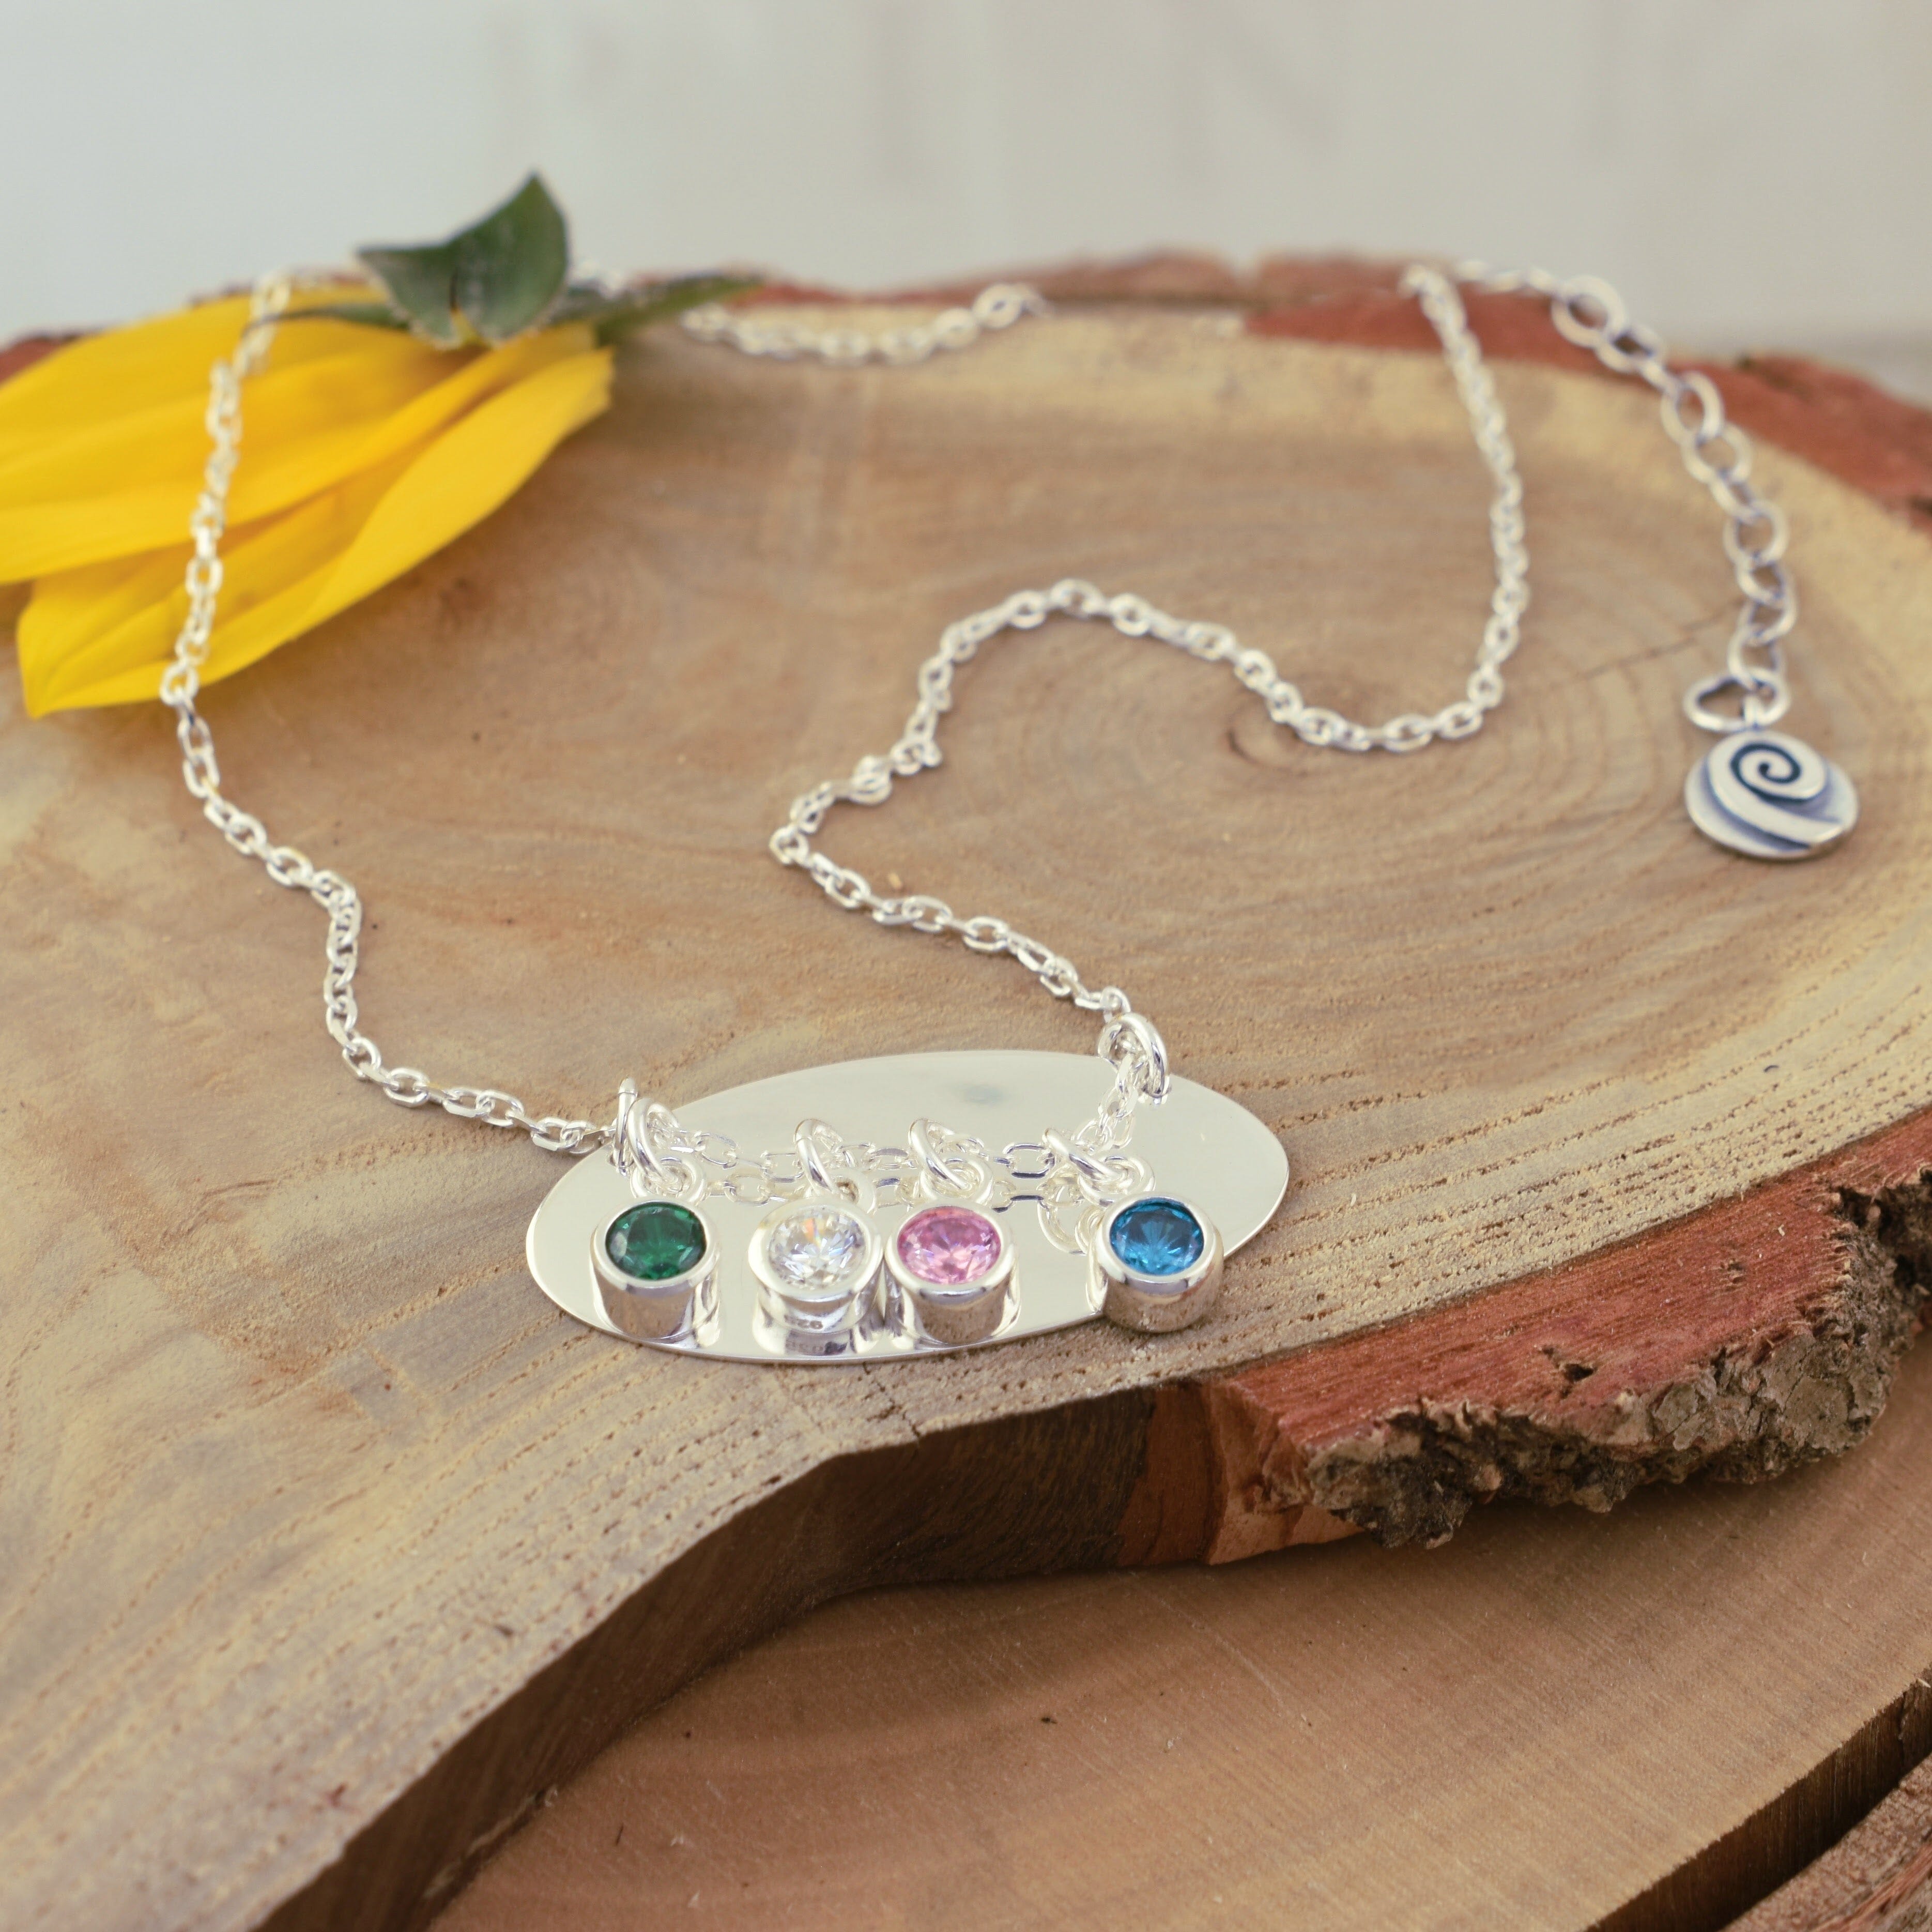 customizable birthstone sliding necklace on top of a plain silver oval disk